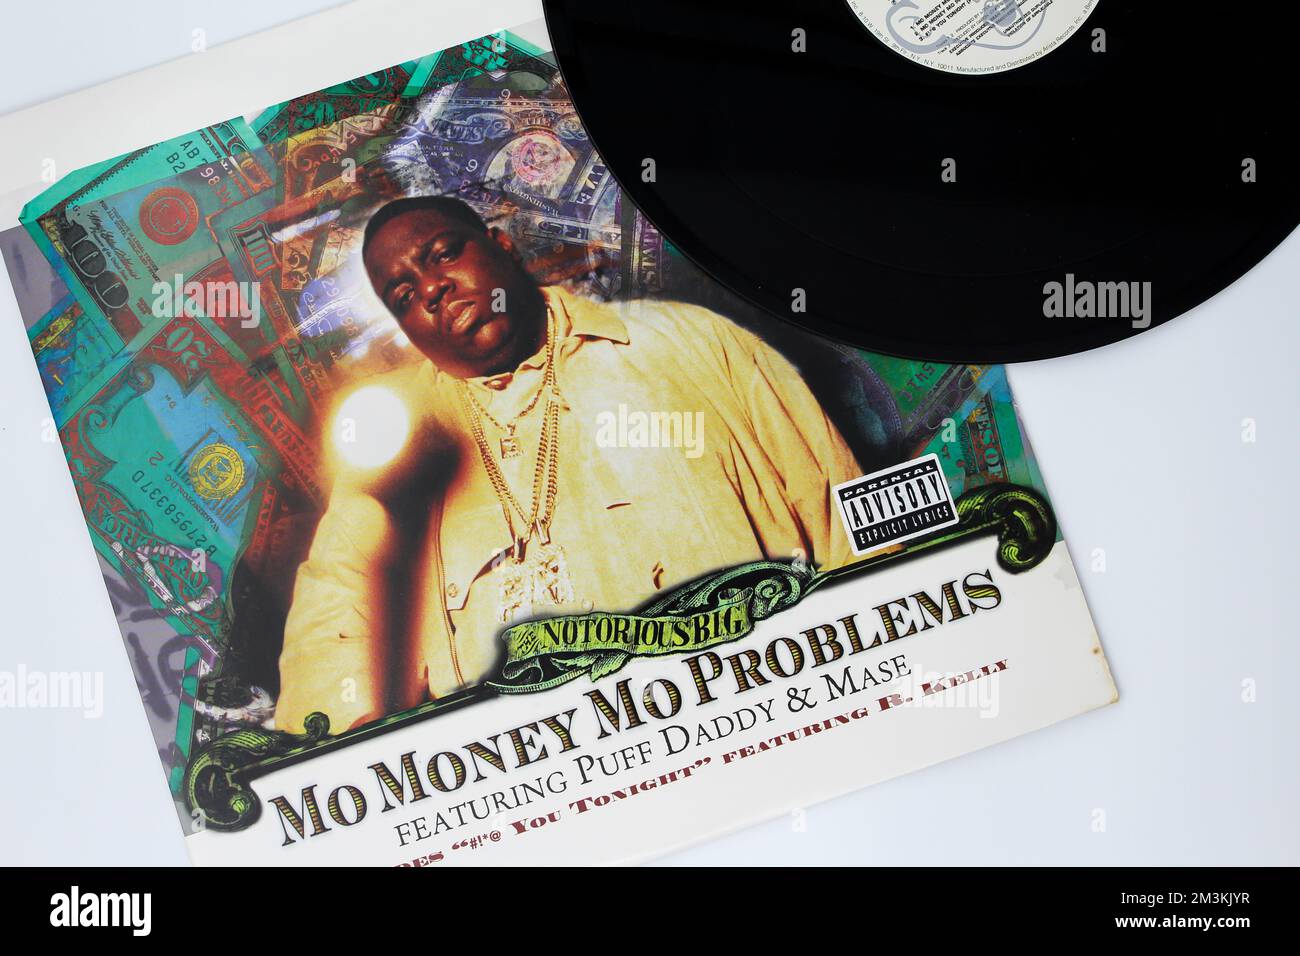 Mo Money Mo Problems is a song by American rapper The Notorious B.I.G aka Biggie Smalls from the album Life After Death on vinyl record LP disc. Stock Photo